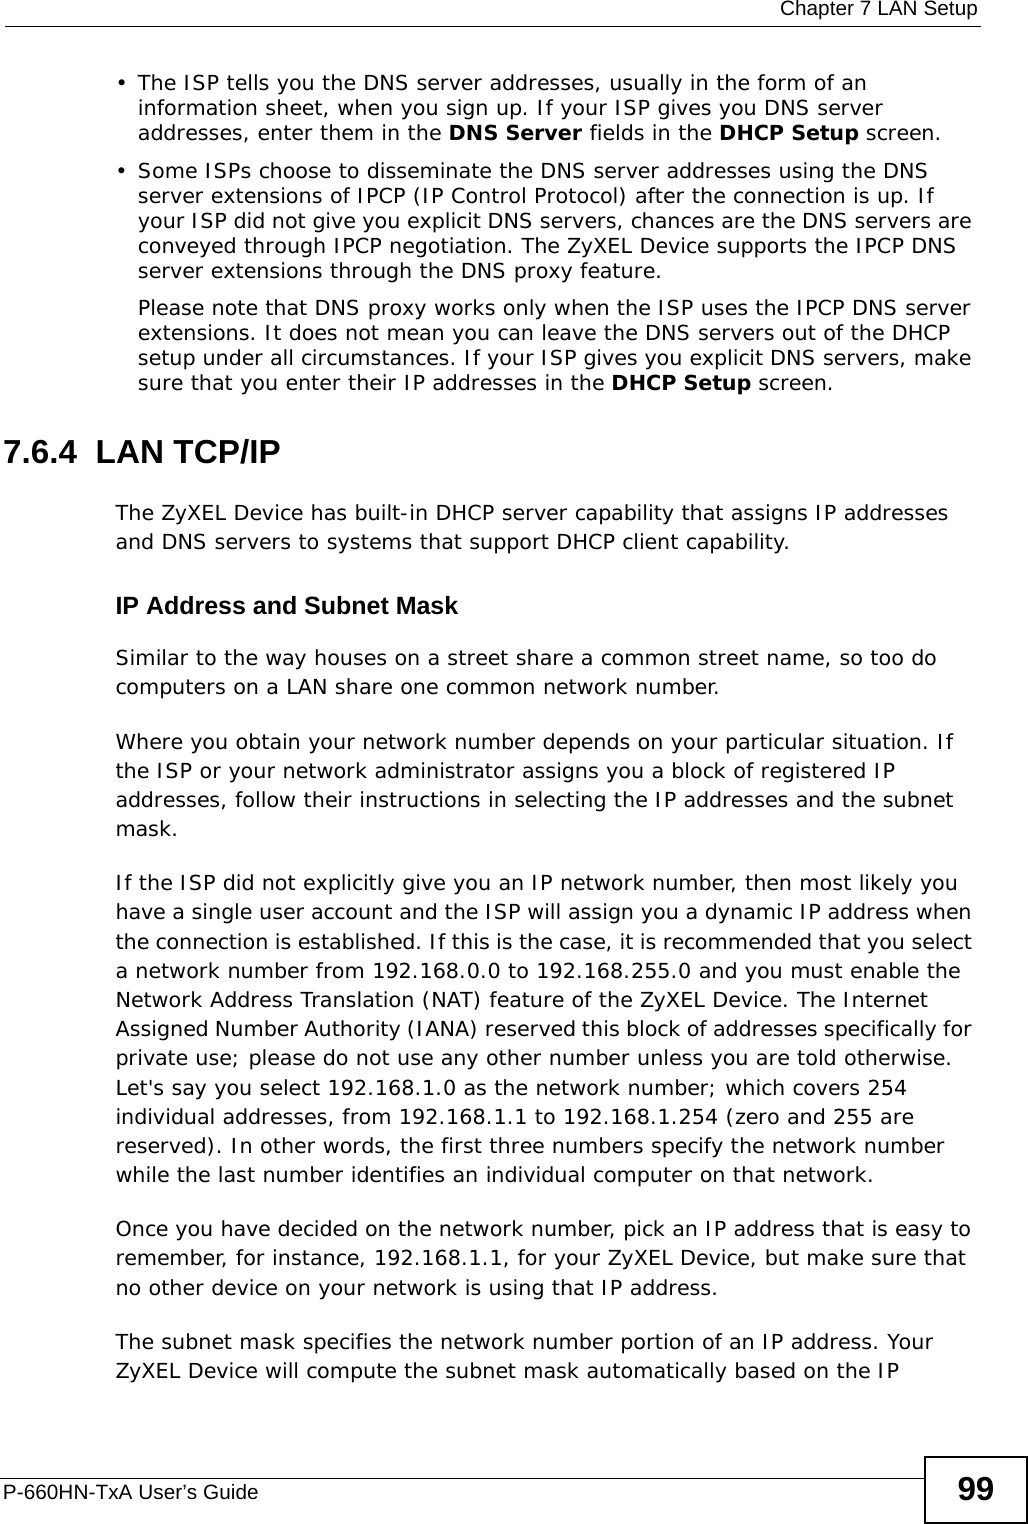  Chapter 7 LAN SetupP-660HN-TxA User’s Guide 99• The ISP tells you the DNS server addresses, usually in the form of an information sheet, when you sign up. If your ISP gives you DNS server addresses, enter them in the DNS Server fields in the DHCP Setup screen.• Some ISPs choose to disseminate the DNS server addresses using the DNS server extensions of IPCP (IP Control Protocol) after the connection is up. If your ISP did not give you explicit DNS servers, chances are the DNS servers are conveyed through IPCP negotiation. The ZyXEL Device supports the IPCP DNS server extensions through the DNS proxy feature.Please note that DNS proxy works only when the ISP uses the IPCP DNS server extensions. It does not mean you can leave the DNS servers out of the DHCP setup under all circumstances. If your ISP gives you explicit DNS servers, make sure that you enter their IP addresses in the DHCP Setup screen.7.6.4  LAN TCP/IP The ZyXEL Device has built-in DHCP server capability that assigns IP addresses and DNS servers to systems that support DHCP client capability.IP Address and Subnet MaskSimilar to the way houses on a street share a common street name, so too do computers on a LAN share one common network number.Where you obtain your network number depends on your particular situation. If the ISP or your network administrator assigns you a block of registered IP addresses, follow their instructions in selecting the IP addresses and the subnet mask.If the ISP did not explicitly give you an IP network number, then most likely you have a single user account and the ISP will assign you a dynamic IP address when the connection is established. If this is the case, it is recommended that you select a network number from 192.168.0.0 to 192.168.255.0 and you must enable the Network Address Translation (NAT) feature of the ZyXEL Device. The Internet Assigned Number Authority (IANA) reserved this block of addresses specifically for private use; please do not use any other number unless you are told otherwise. Let&apos;s say you select 192.168.1.0 as the network number; which covers 254 individual addresses, from 192.168.1.1 to 192.168.1.254 (zero and 255 are reserved). In other words, the first three numbers specify the network number while the last number identifies an individual computer on that network.Once you have decided on the network number, pick an IP address that is easy to remember, for instance, 192.168.1.1, for your ZyXEL Device, but make sure that no other device on your network is using that IP address.The subnet mask specifies the network number portion of an IP address. Your ZyXEL Device will compute the subnet mask automatically based on the IP 